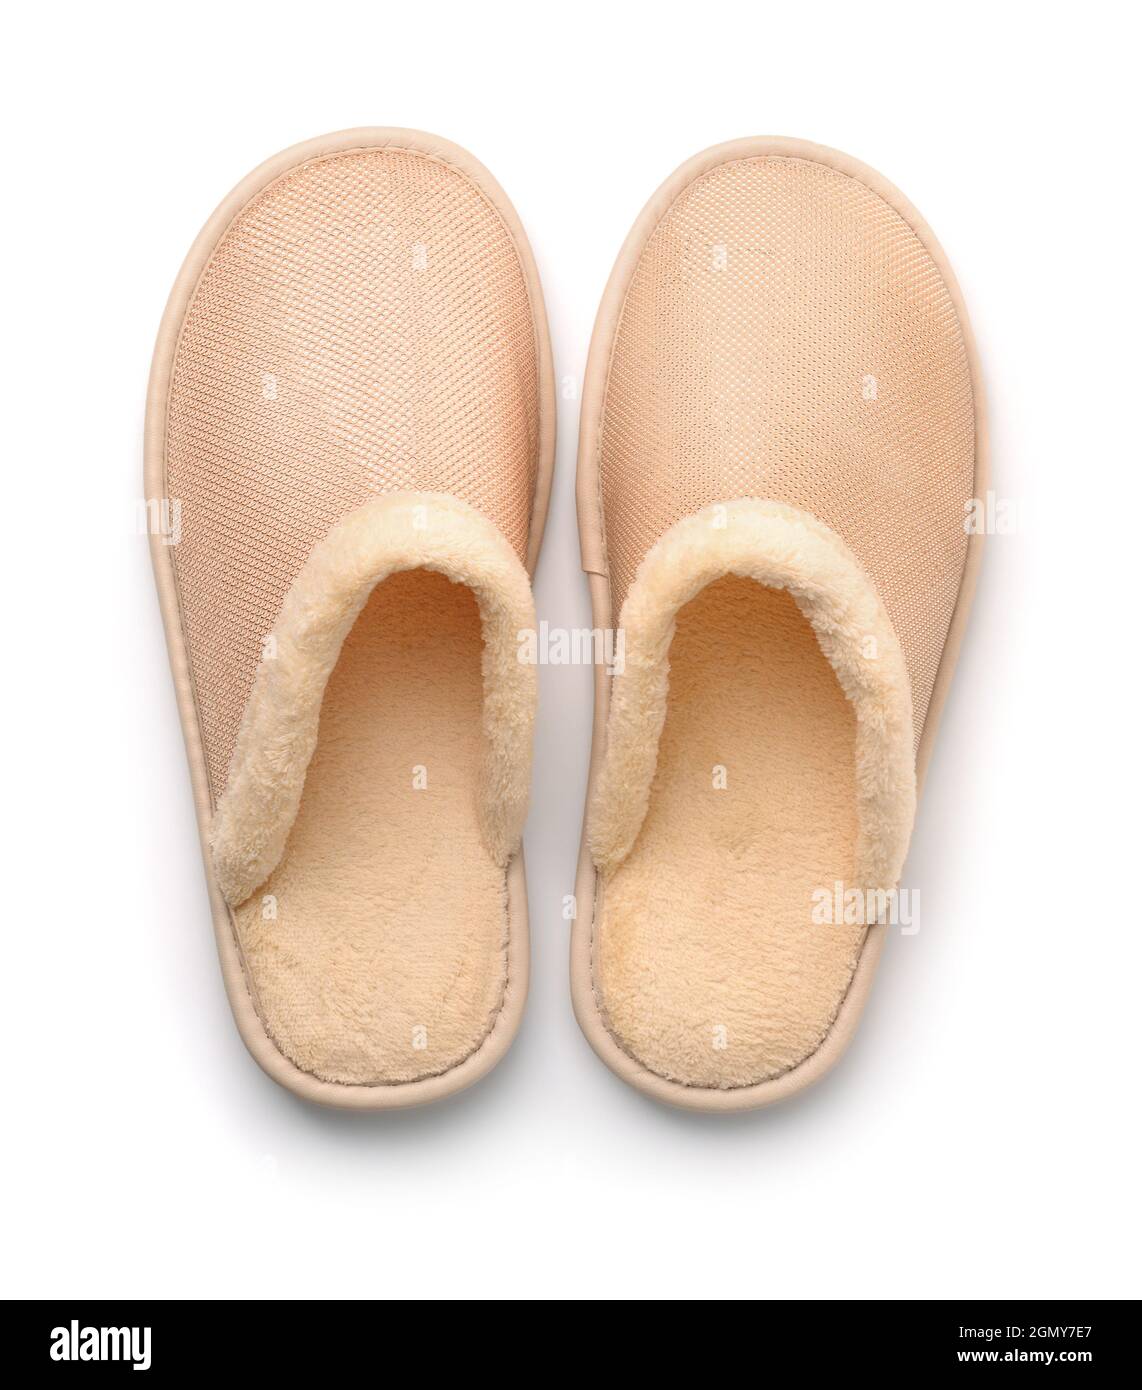 Top view of soft beige home slippers isolated on white Stock Photo